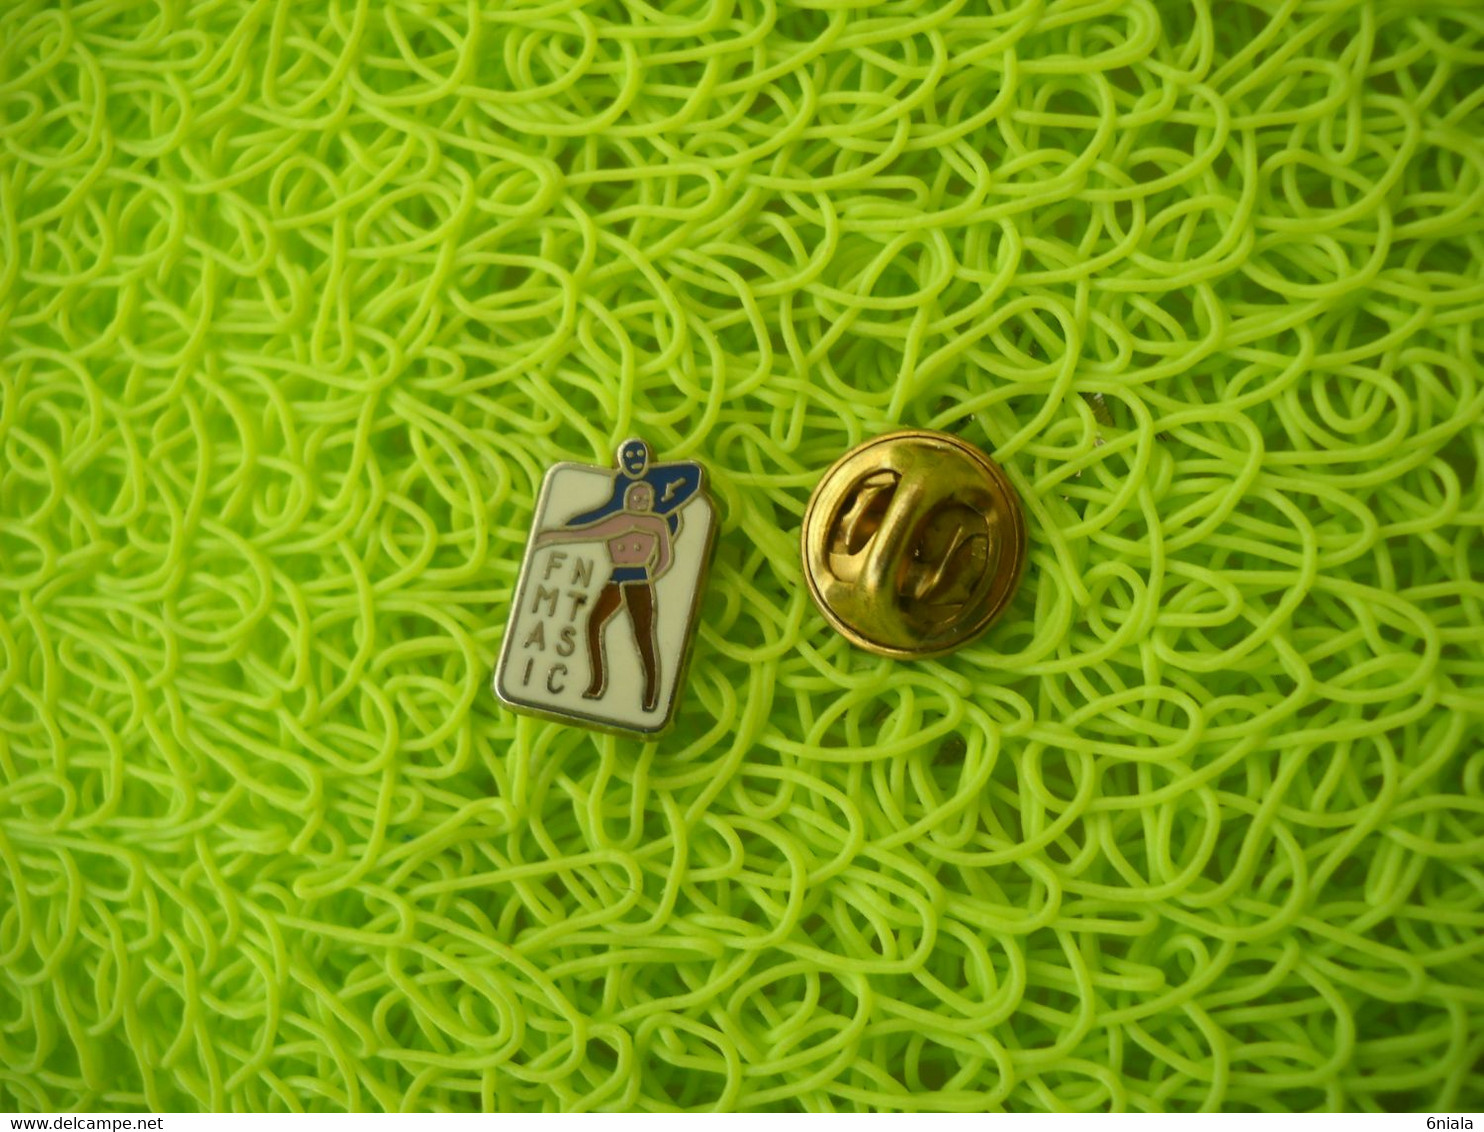 2052  PINS  Pin's     FNMTASIC  FN MT ASIC  Patinage Artistique  Couple - Patinaje Artístico